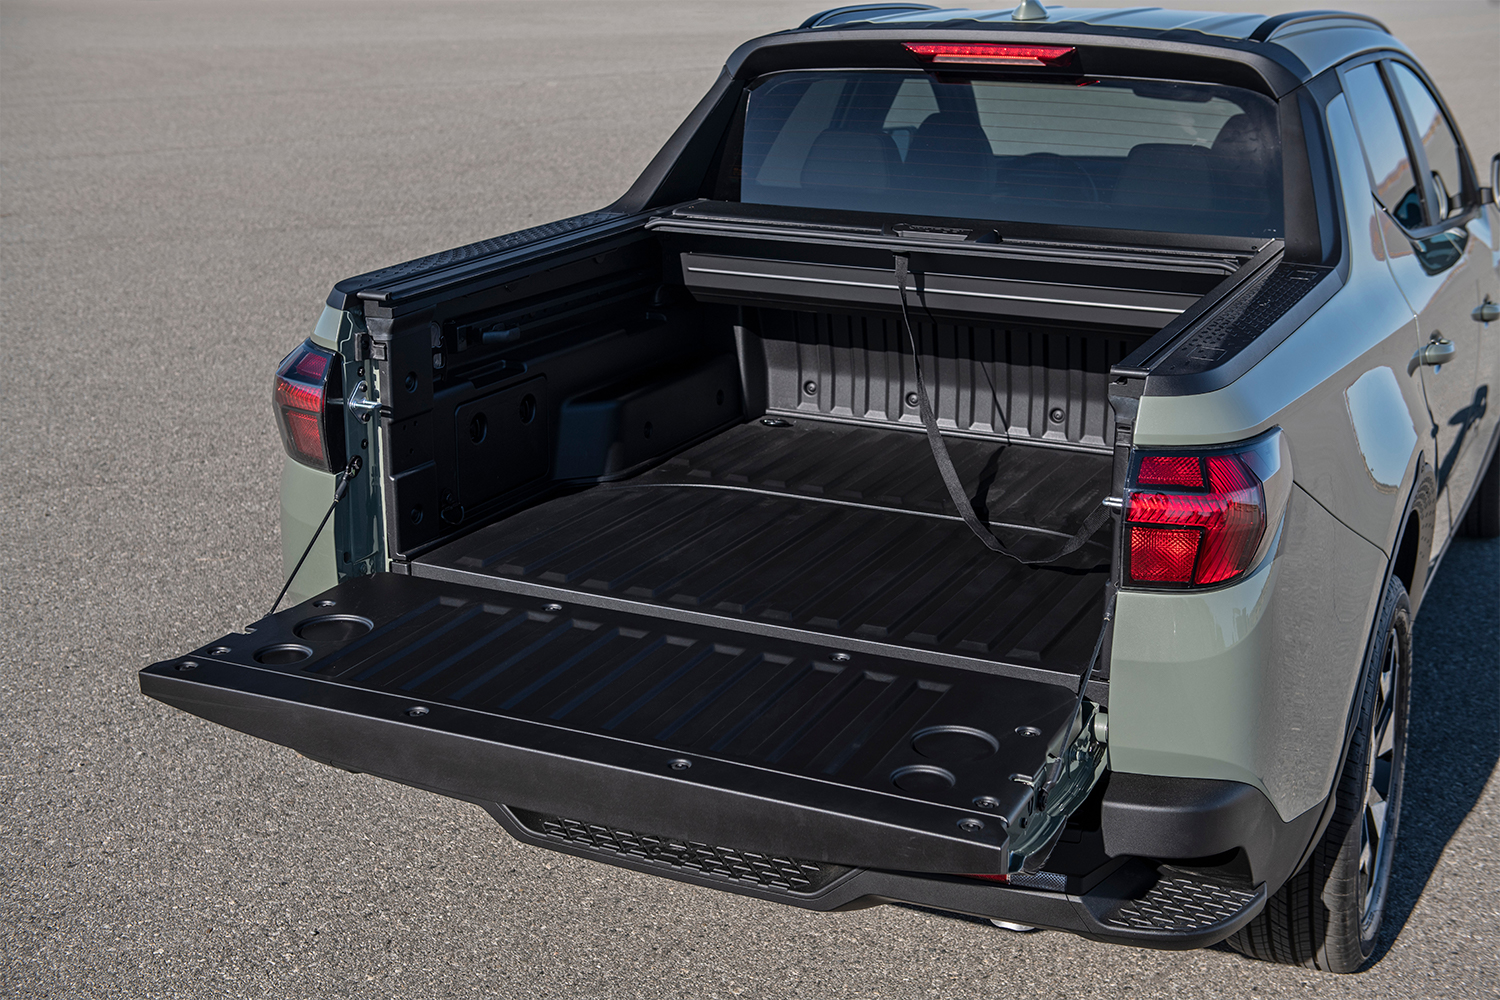 What does the cargo bed on the 2022 Hyundai Santa Cruz look like? This photo shows the tailgate down on the open bed.